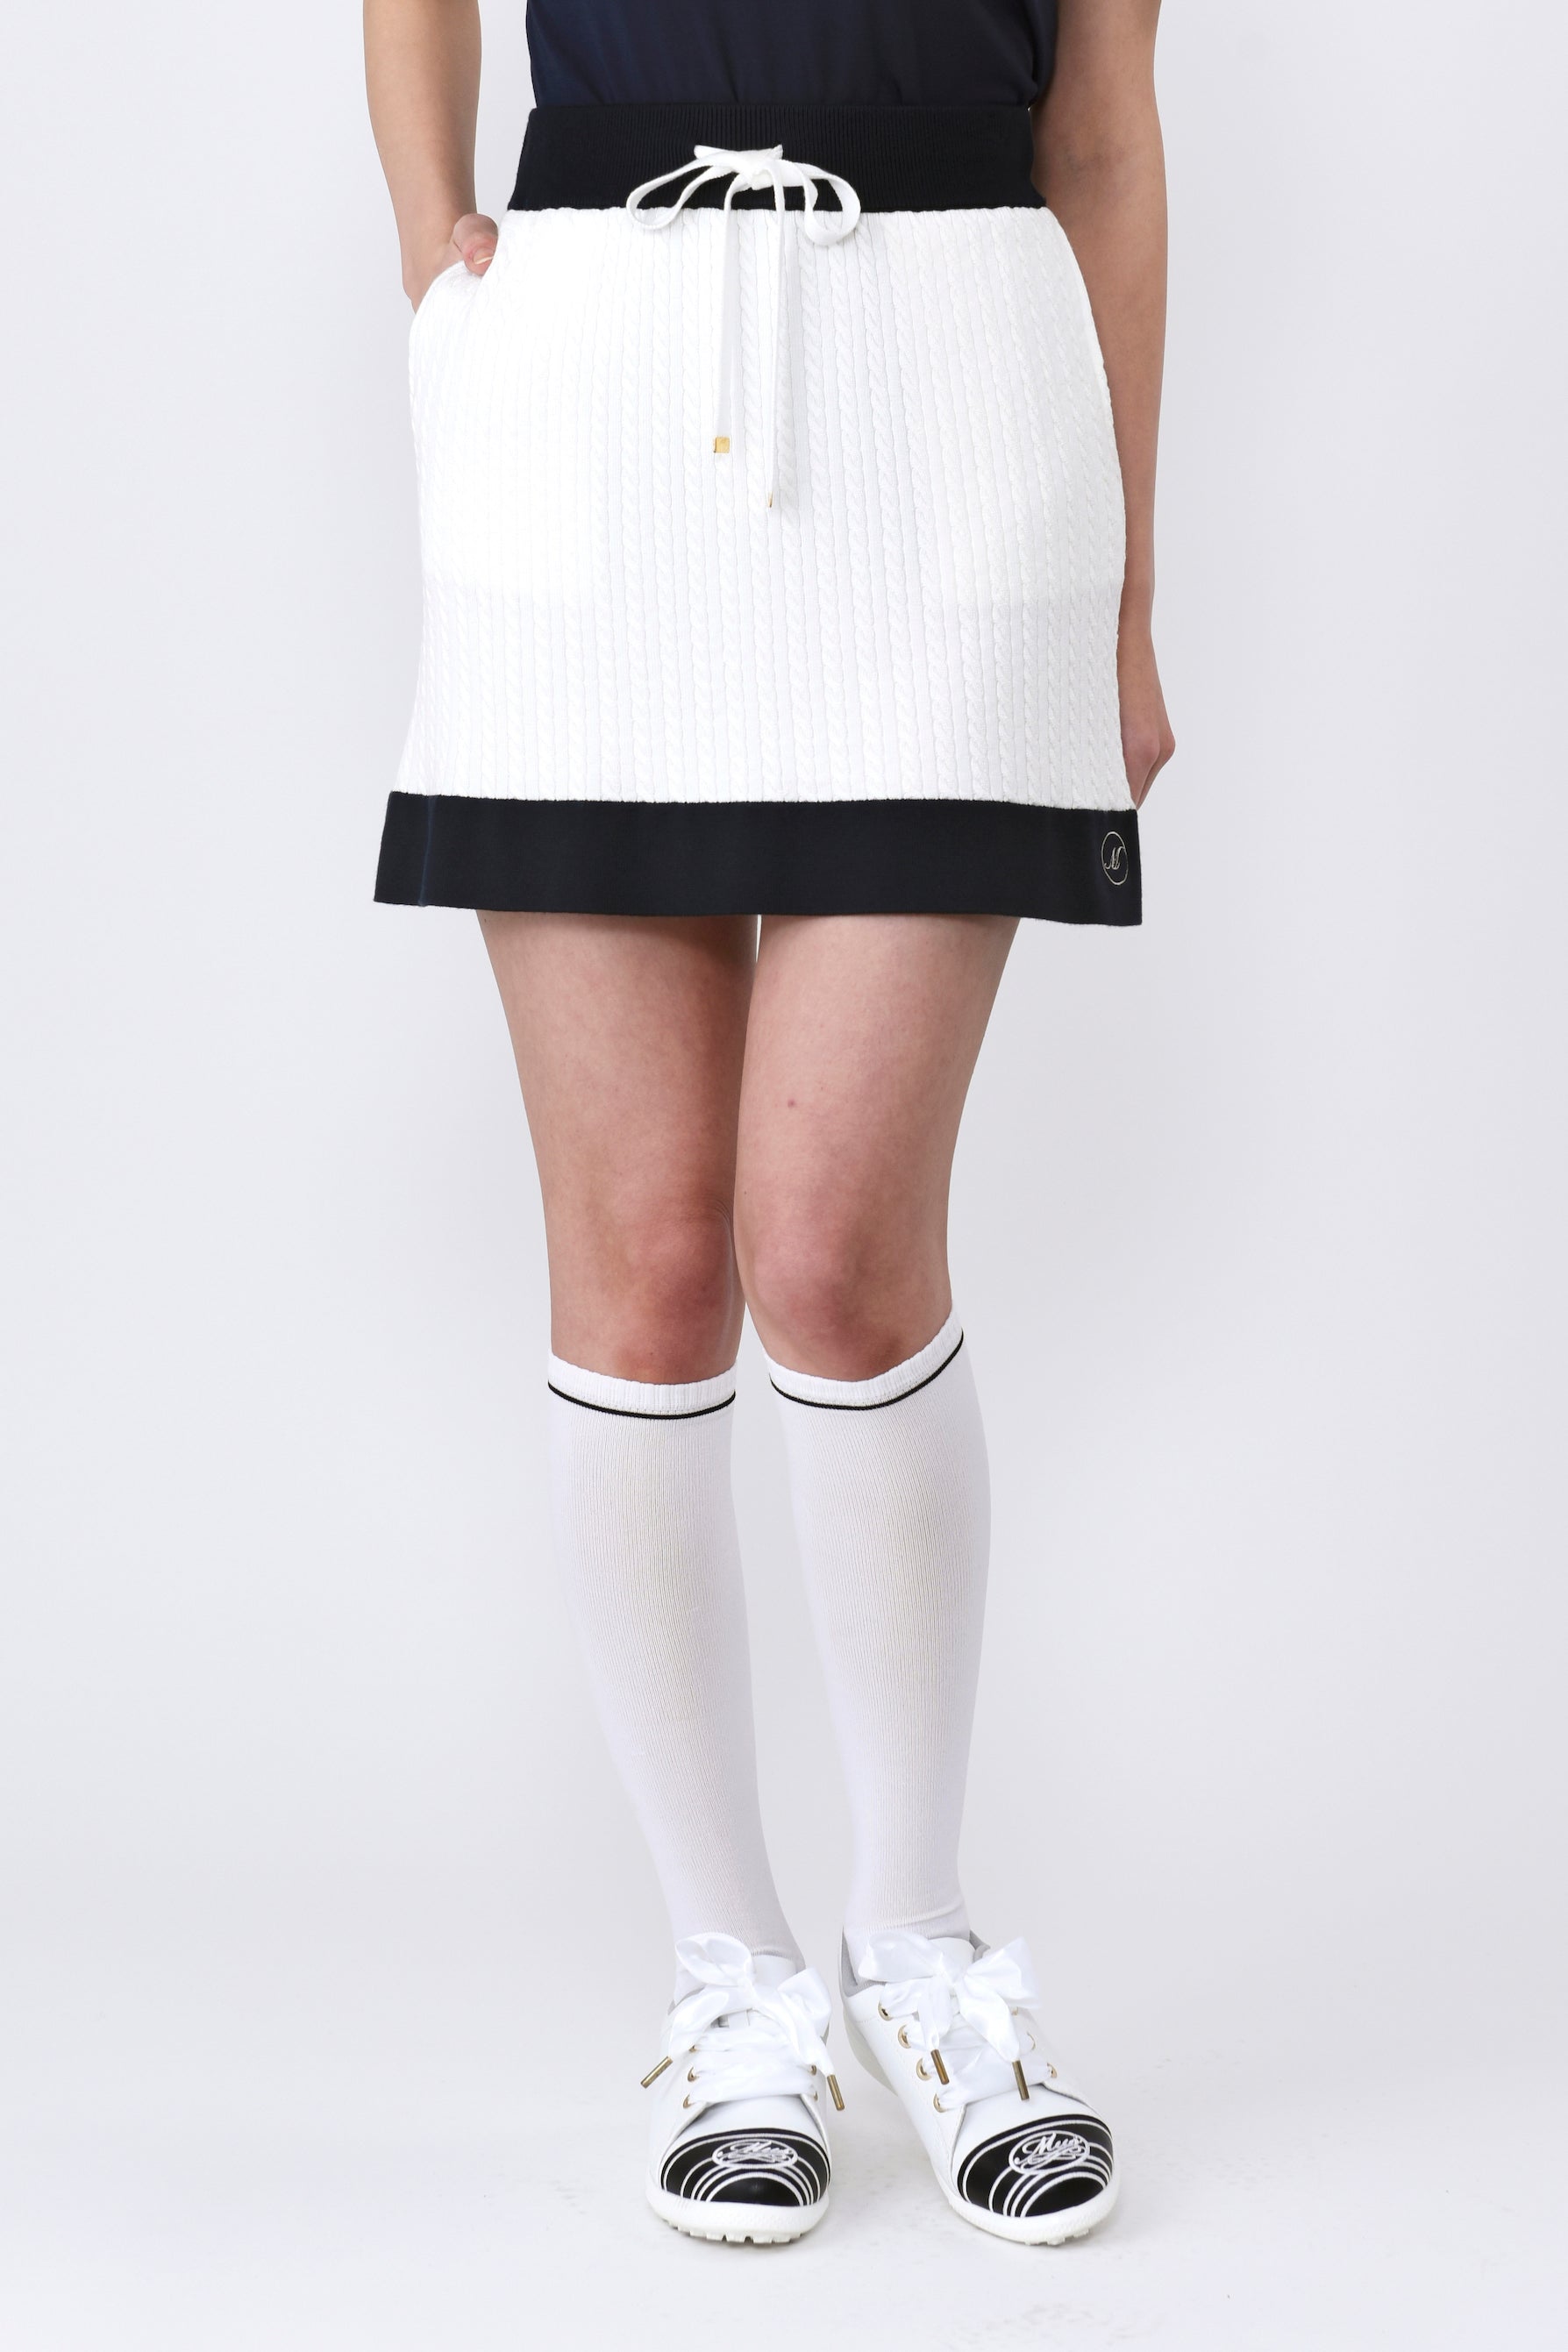 Micro cable bicolor knit skirt (701J1504)